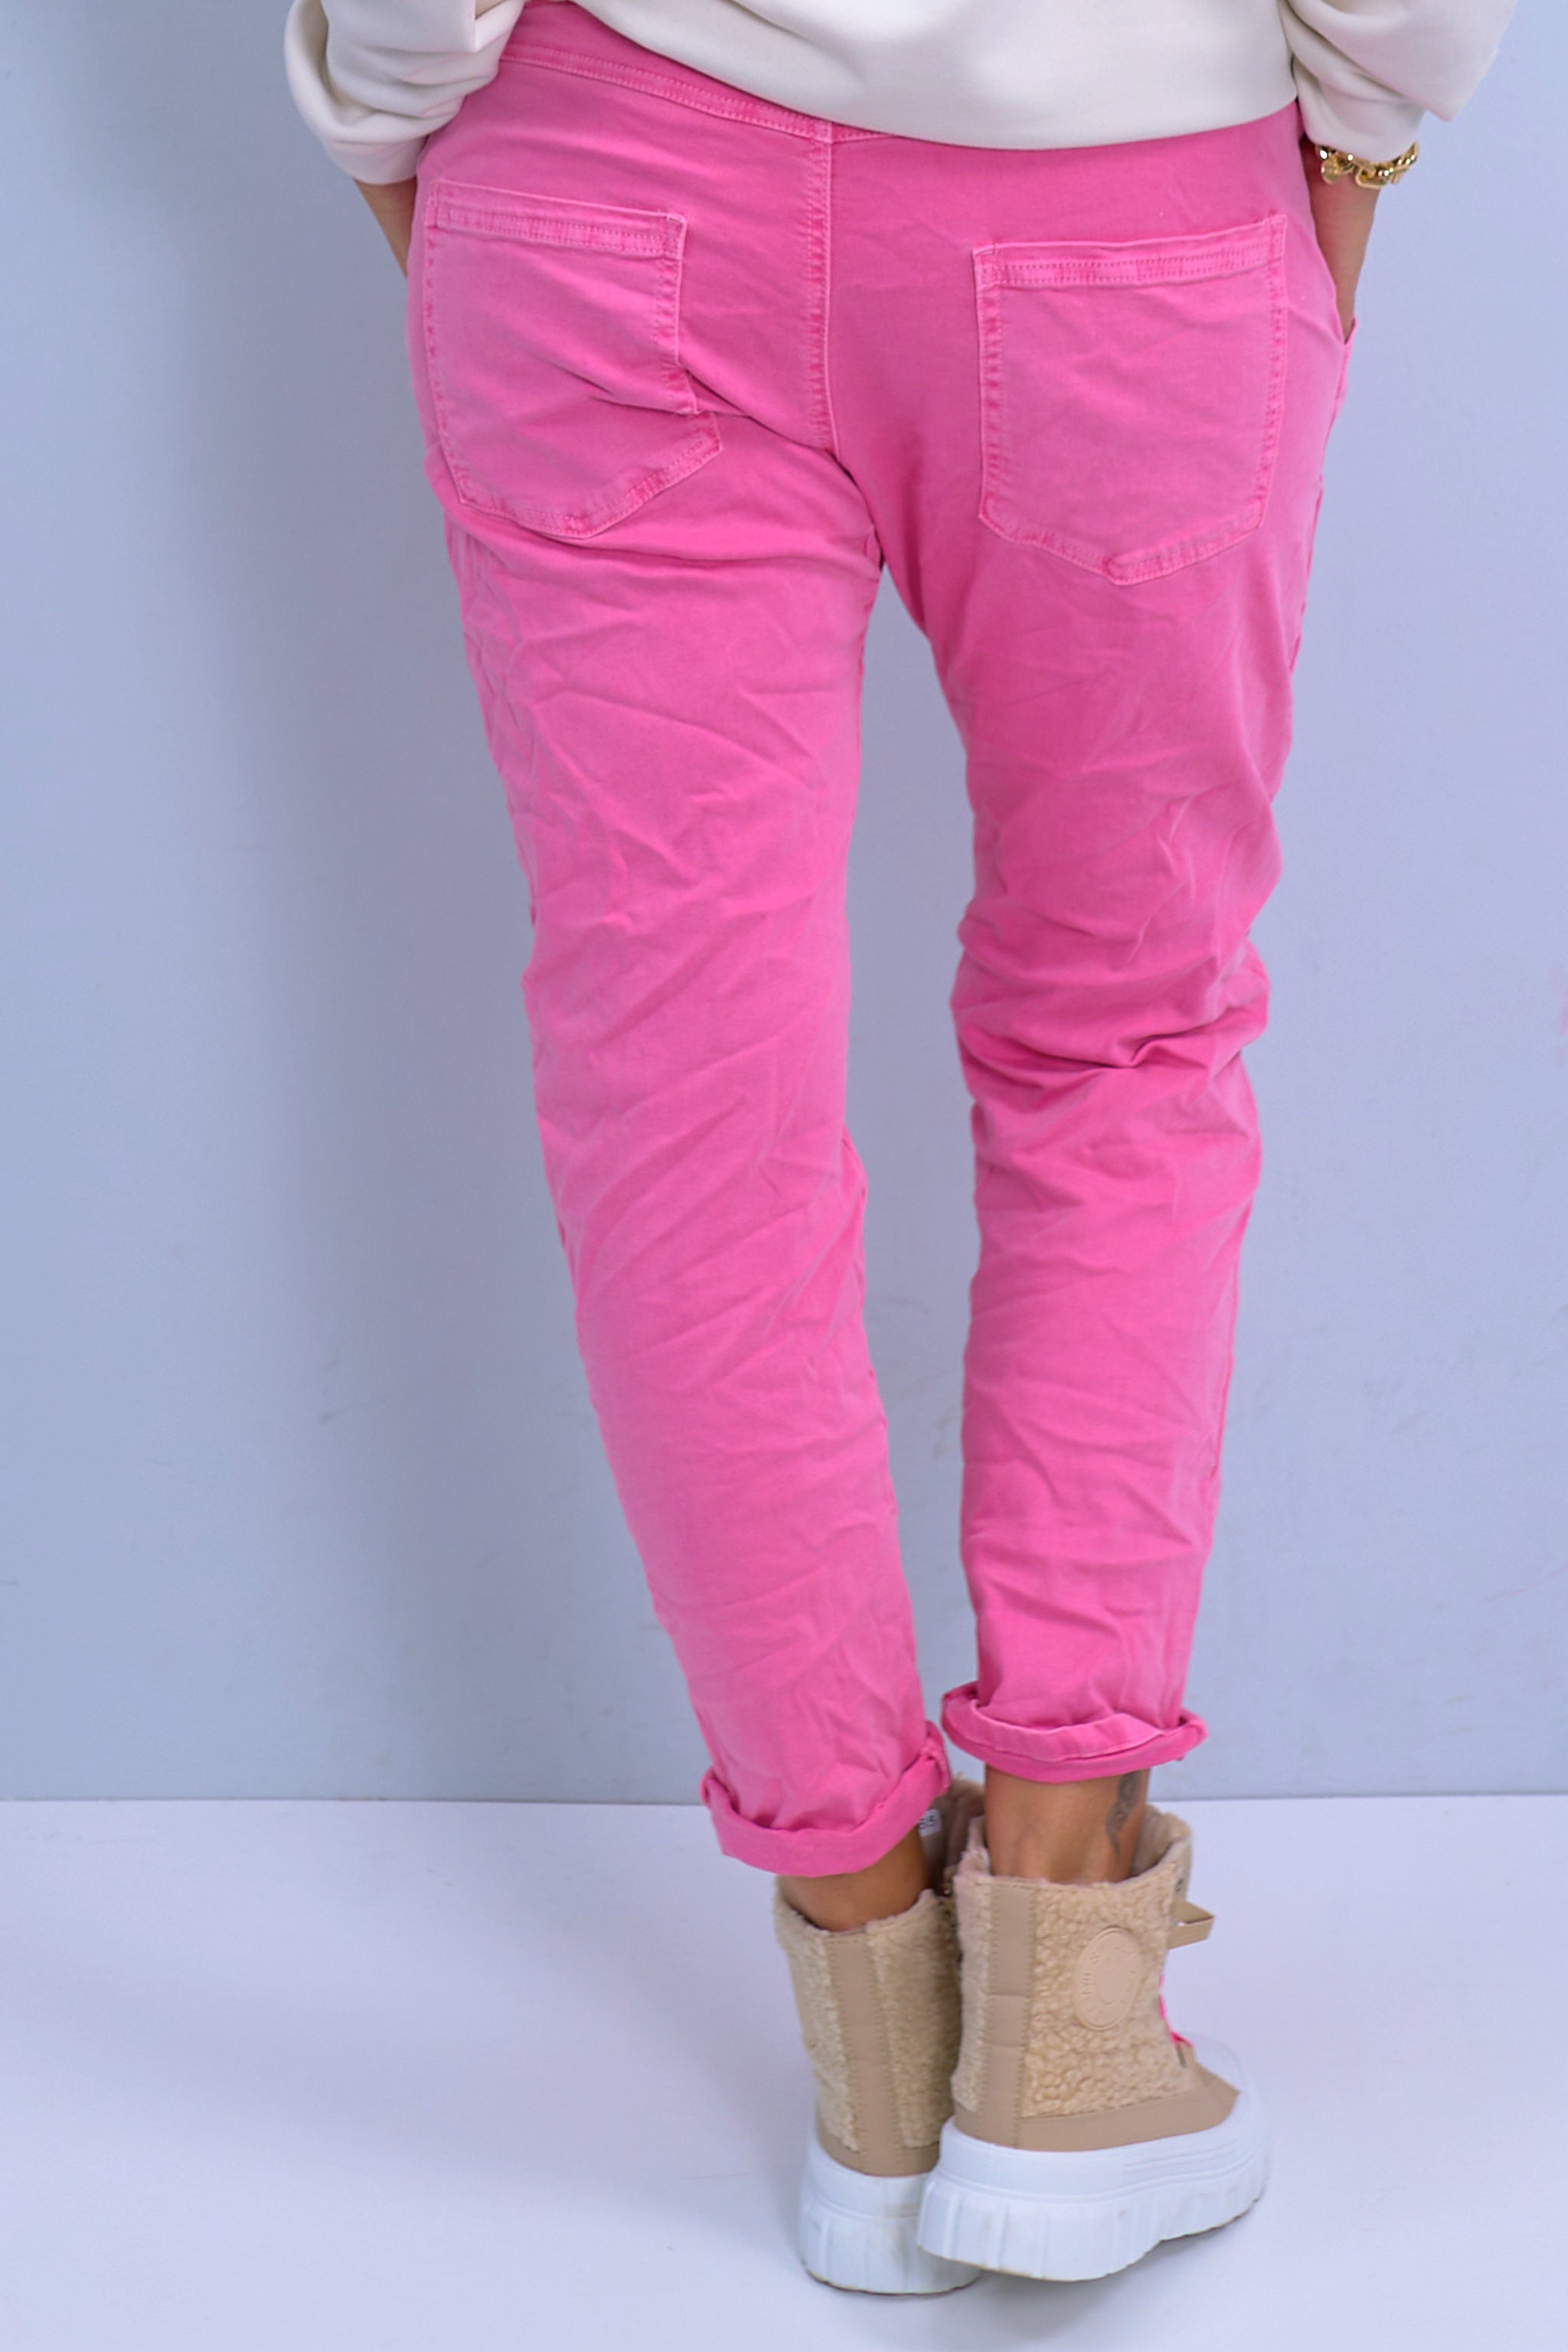 Stretch jeans pants with patch pockets, pink